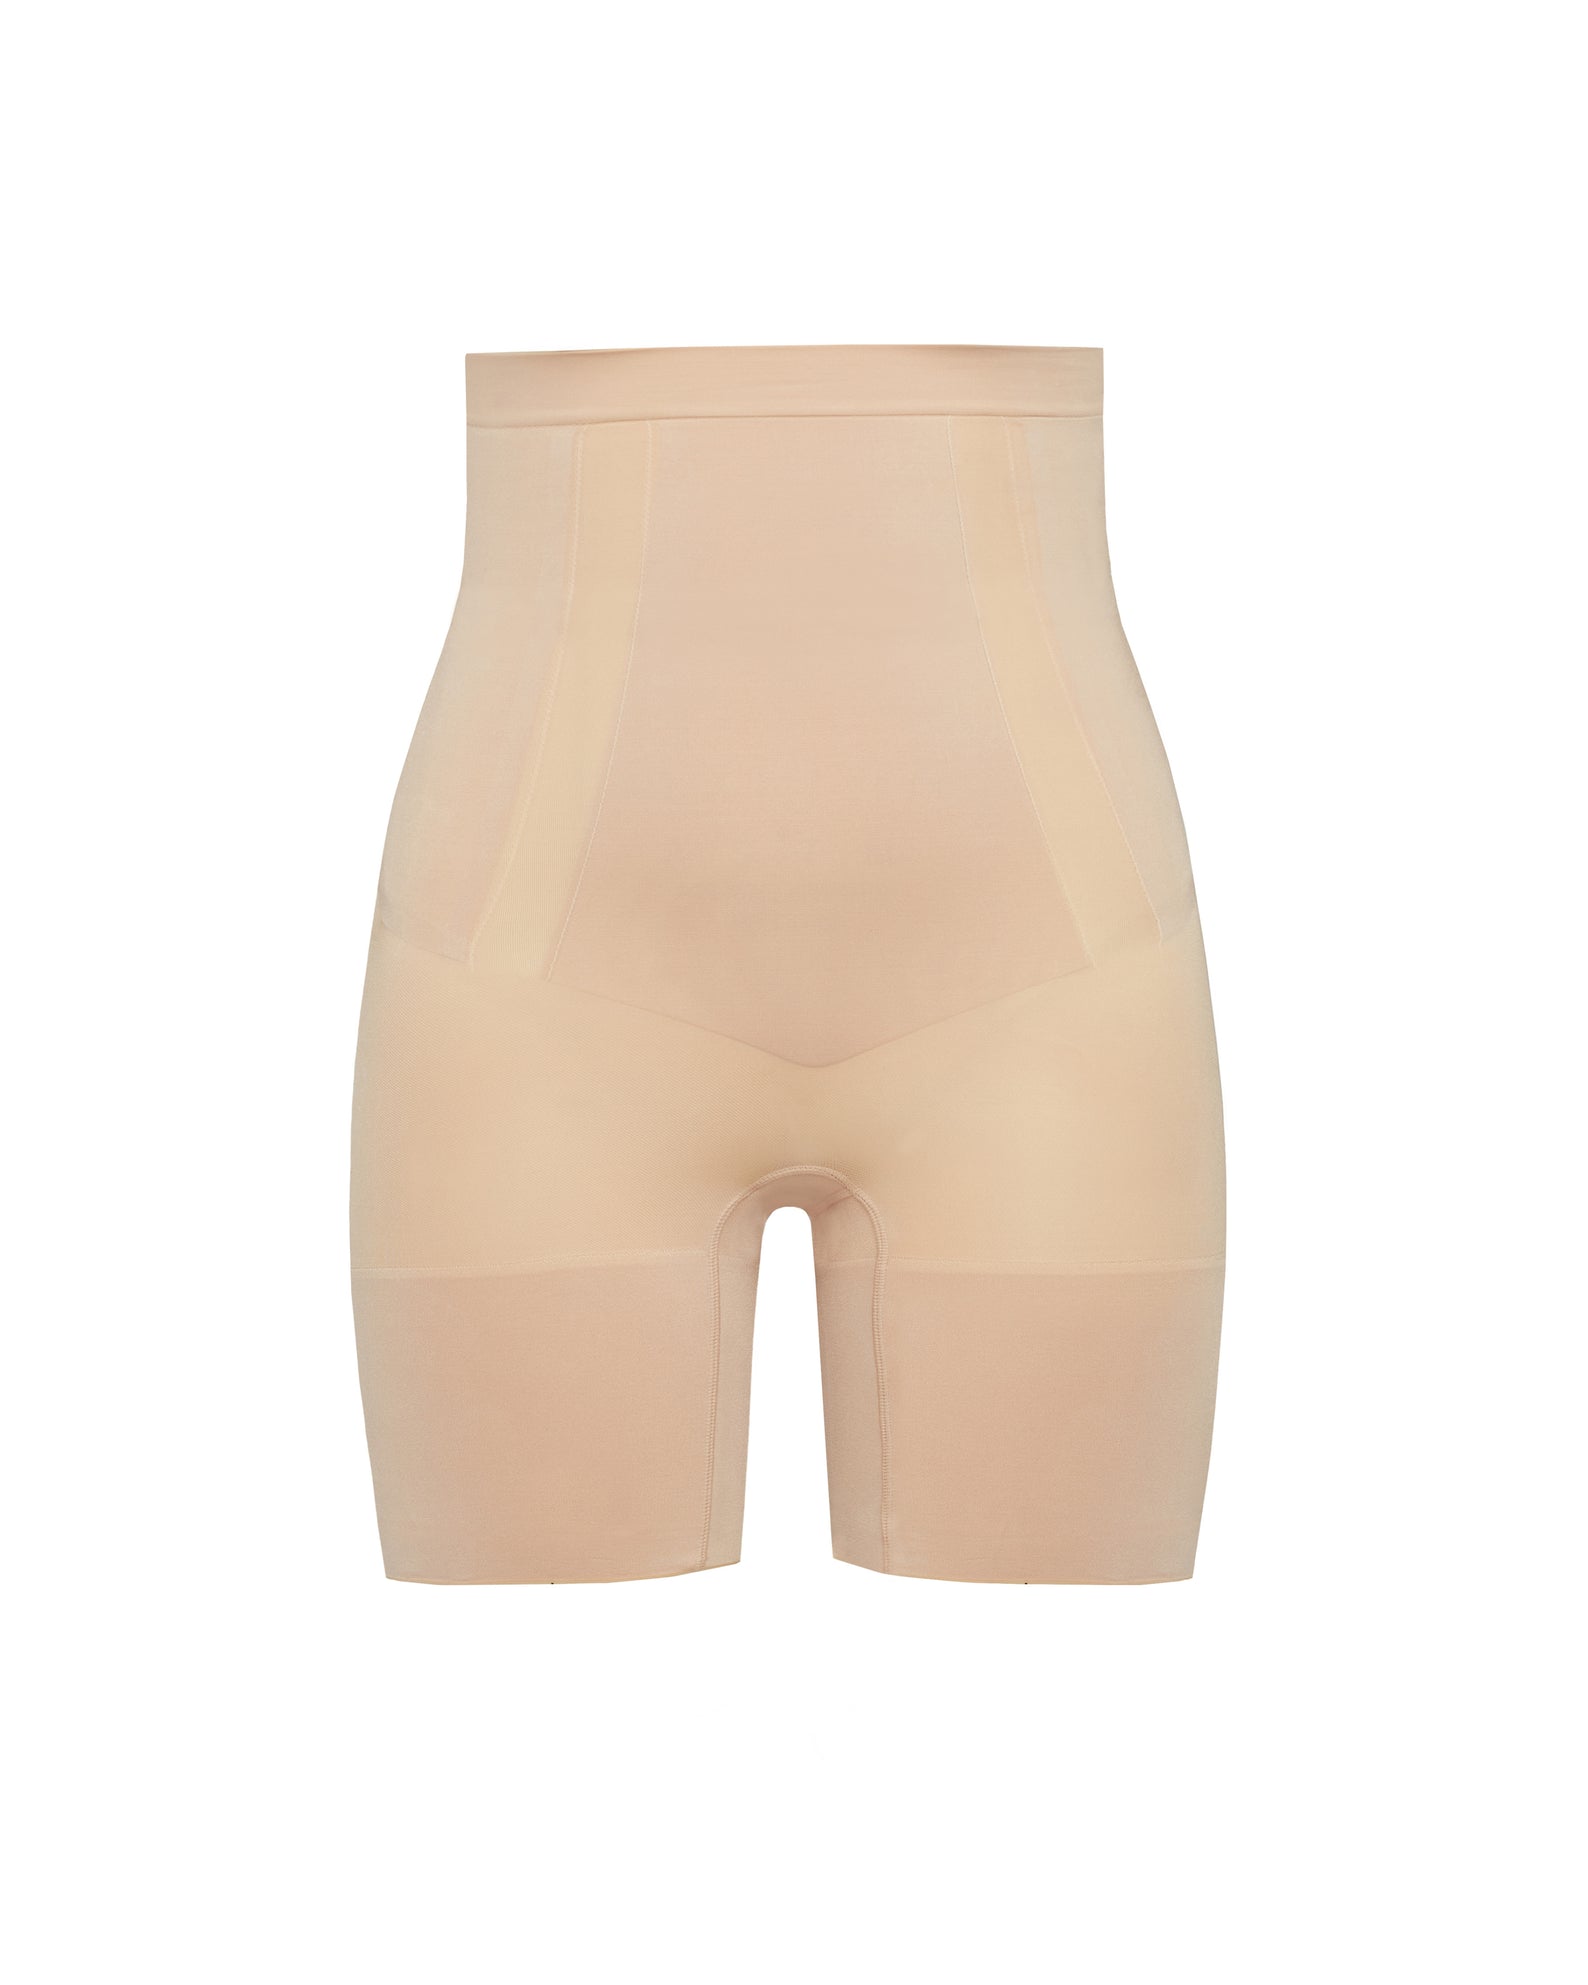 This is next generation shapewear., foundation garment, Unlike other  shapewear, Honeylove never rolls down or rides up.